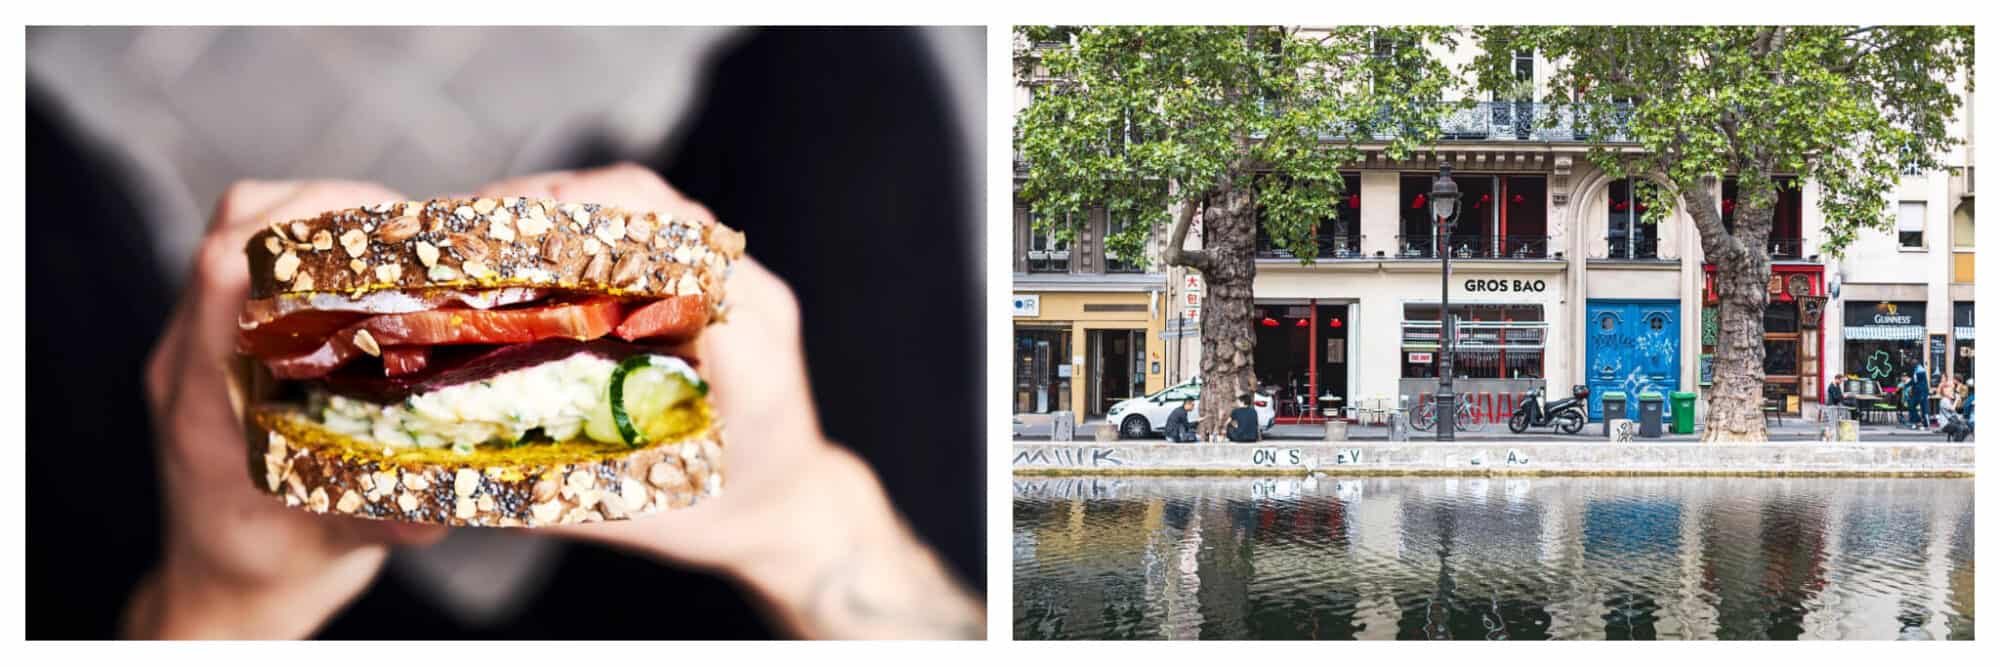 Left: A person holds a sandwich stuffed with vegetables from Back in Black, Right: The exterior of Grand Bao, which sits just next to the Canal St. Martin. 